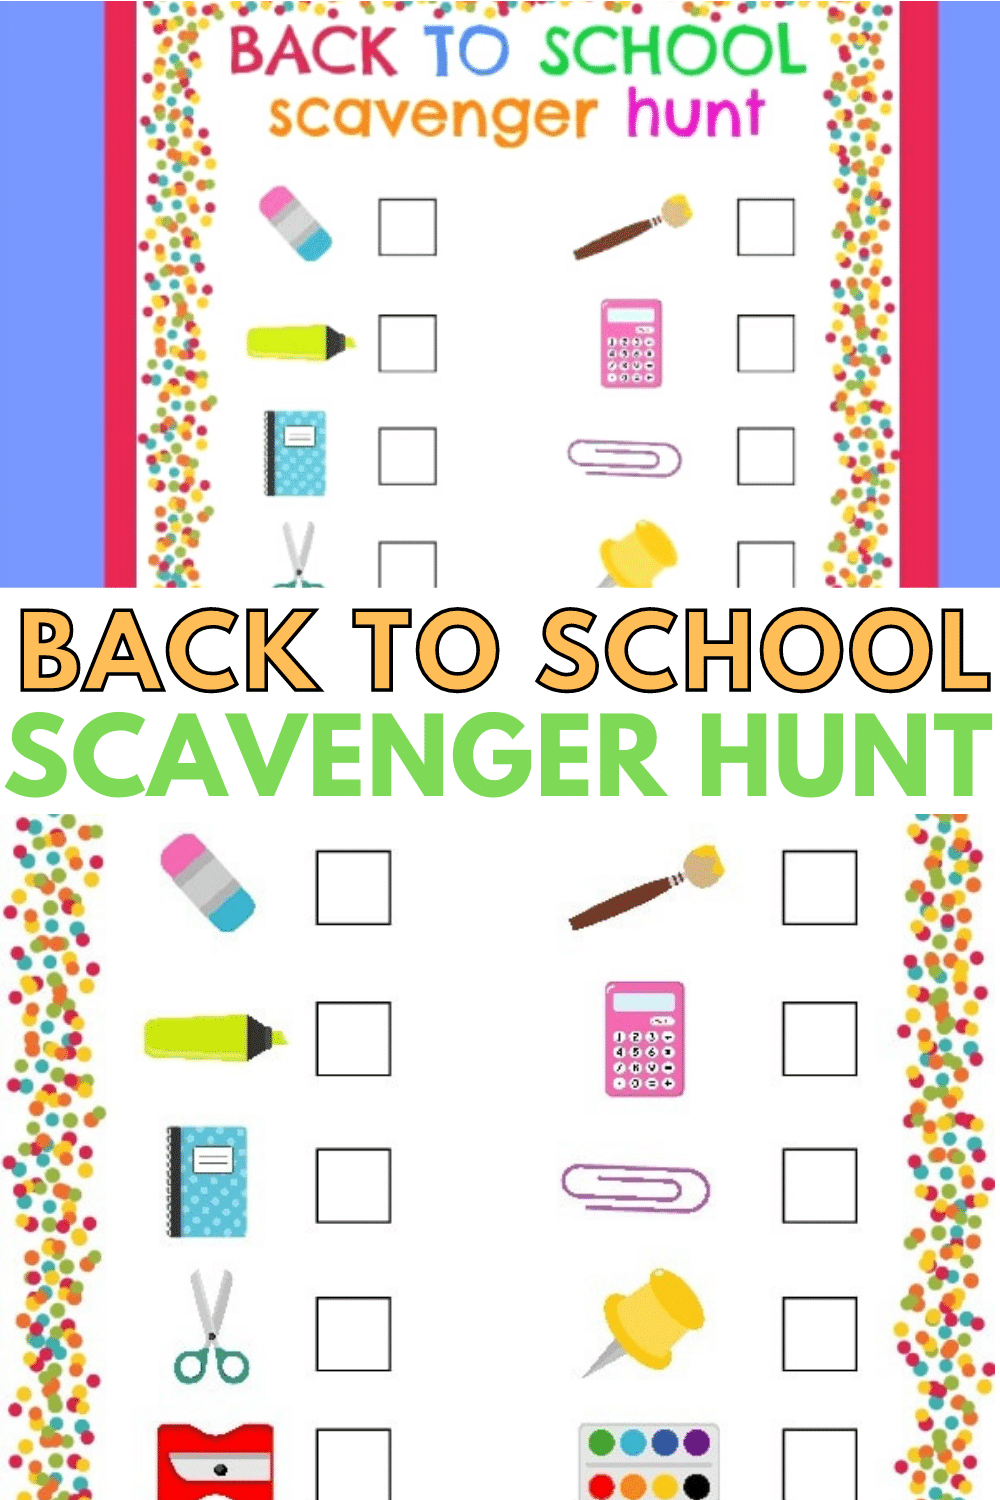 A back to school scavenger hunt is a fun way to get kids excited about a new school year. This free printable scavenger hunt is a colorful and easy game. #scavengerhunt #printable #forkids #backtoschool via @wondermomwannab